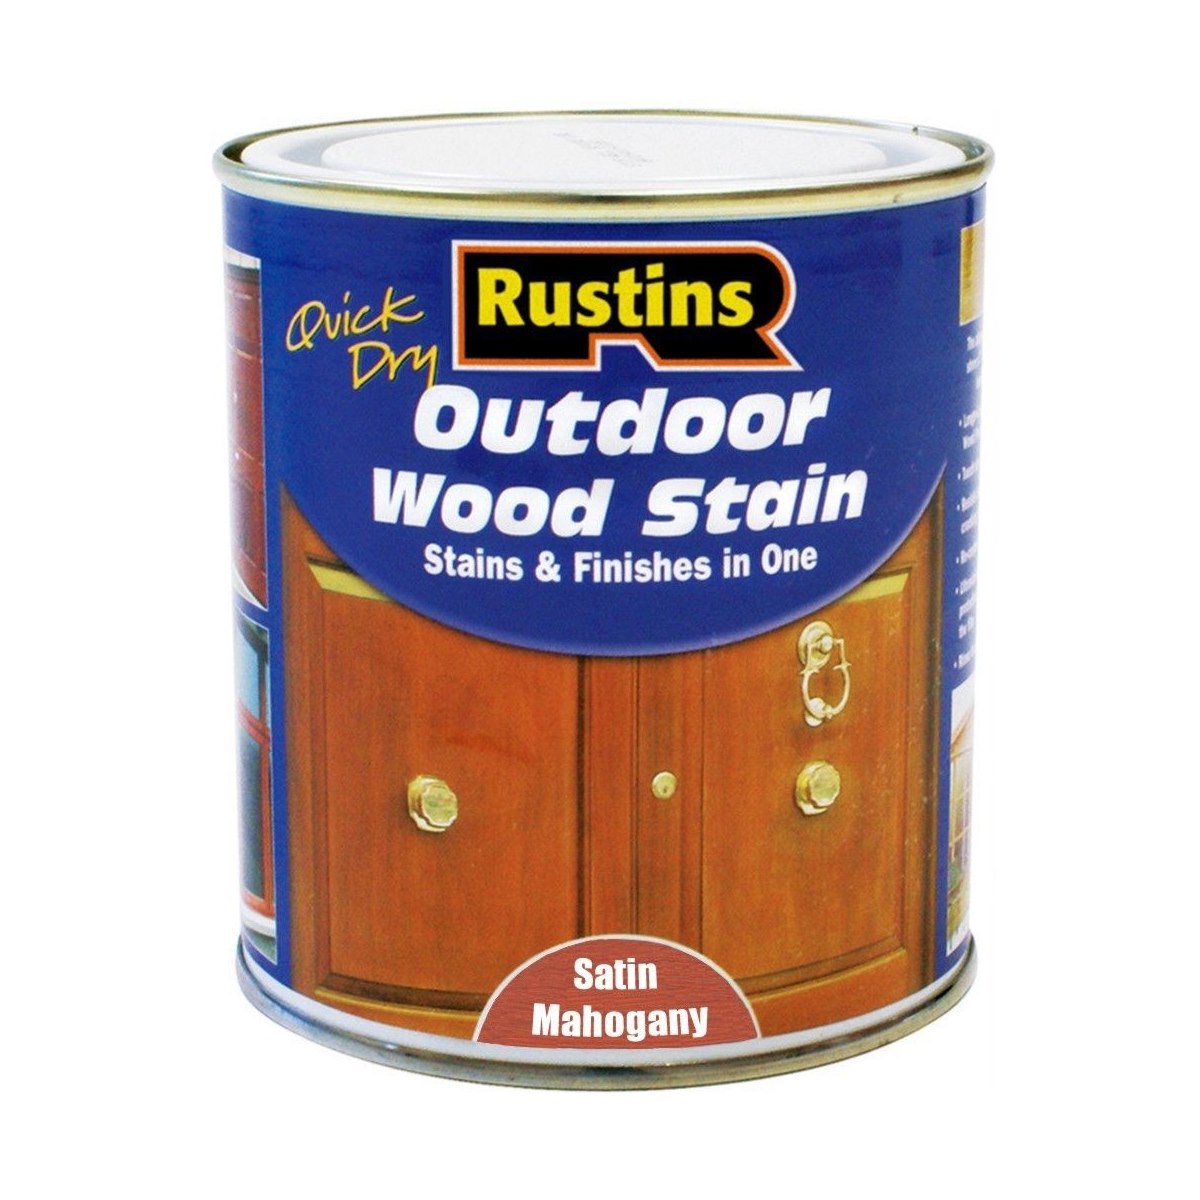 Rustins Quick Dry Outdoor Wood Stain Mahogany 2.5 Litre